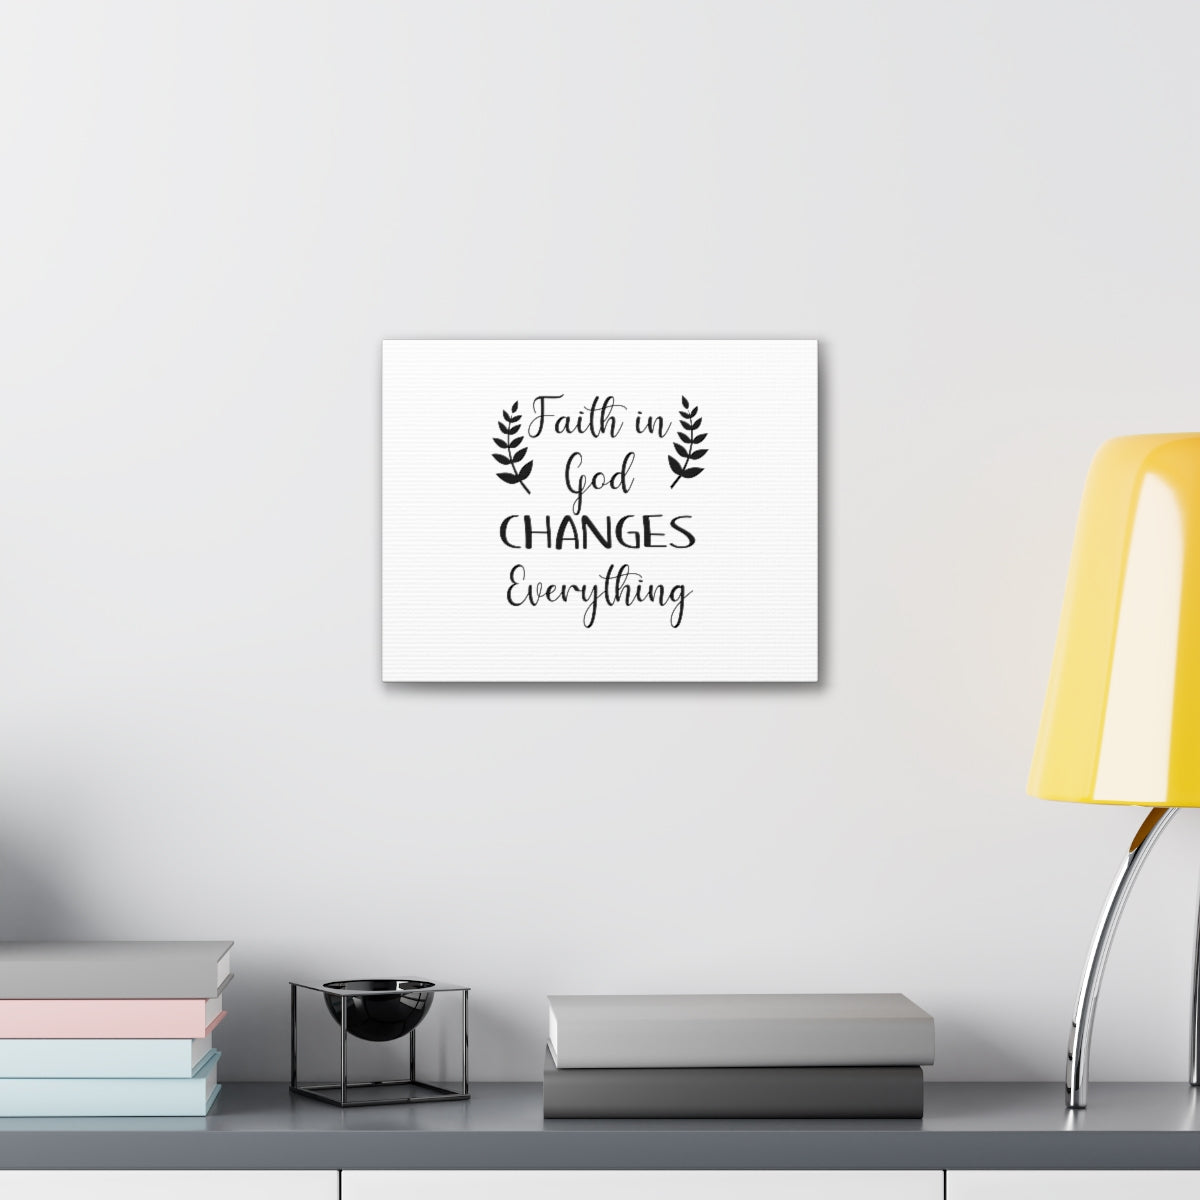 Scripture Walls Faith In God 2 Corinthians 5:17 Christian Wall Art Bible Verse Print Ready to Hang Unframed-Express Your Love Gifts